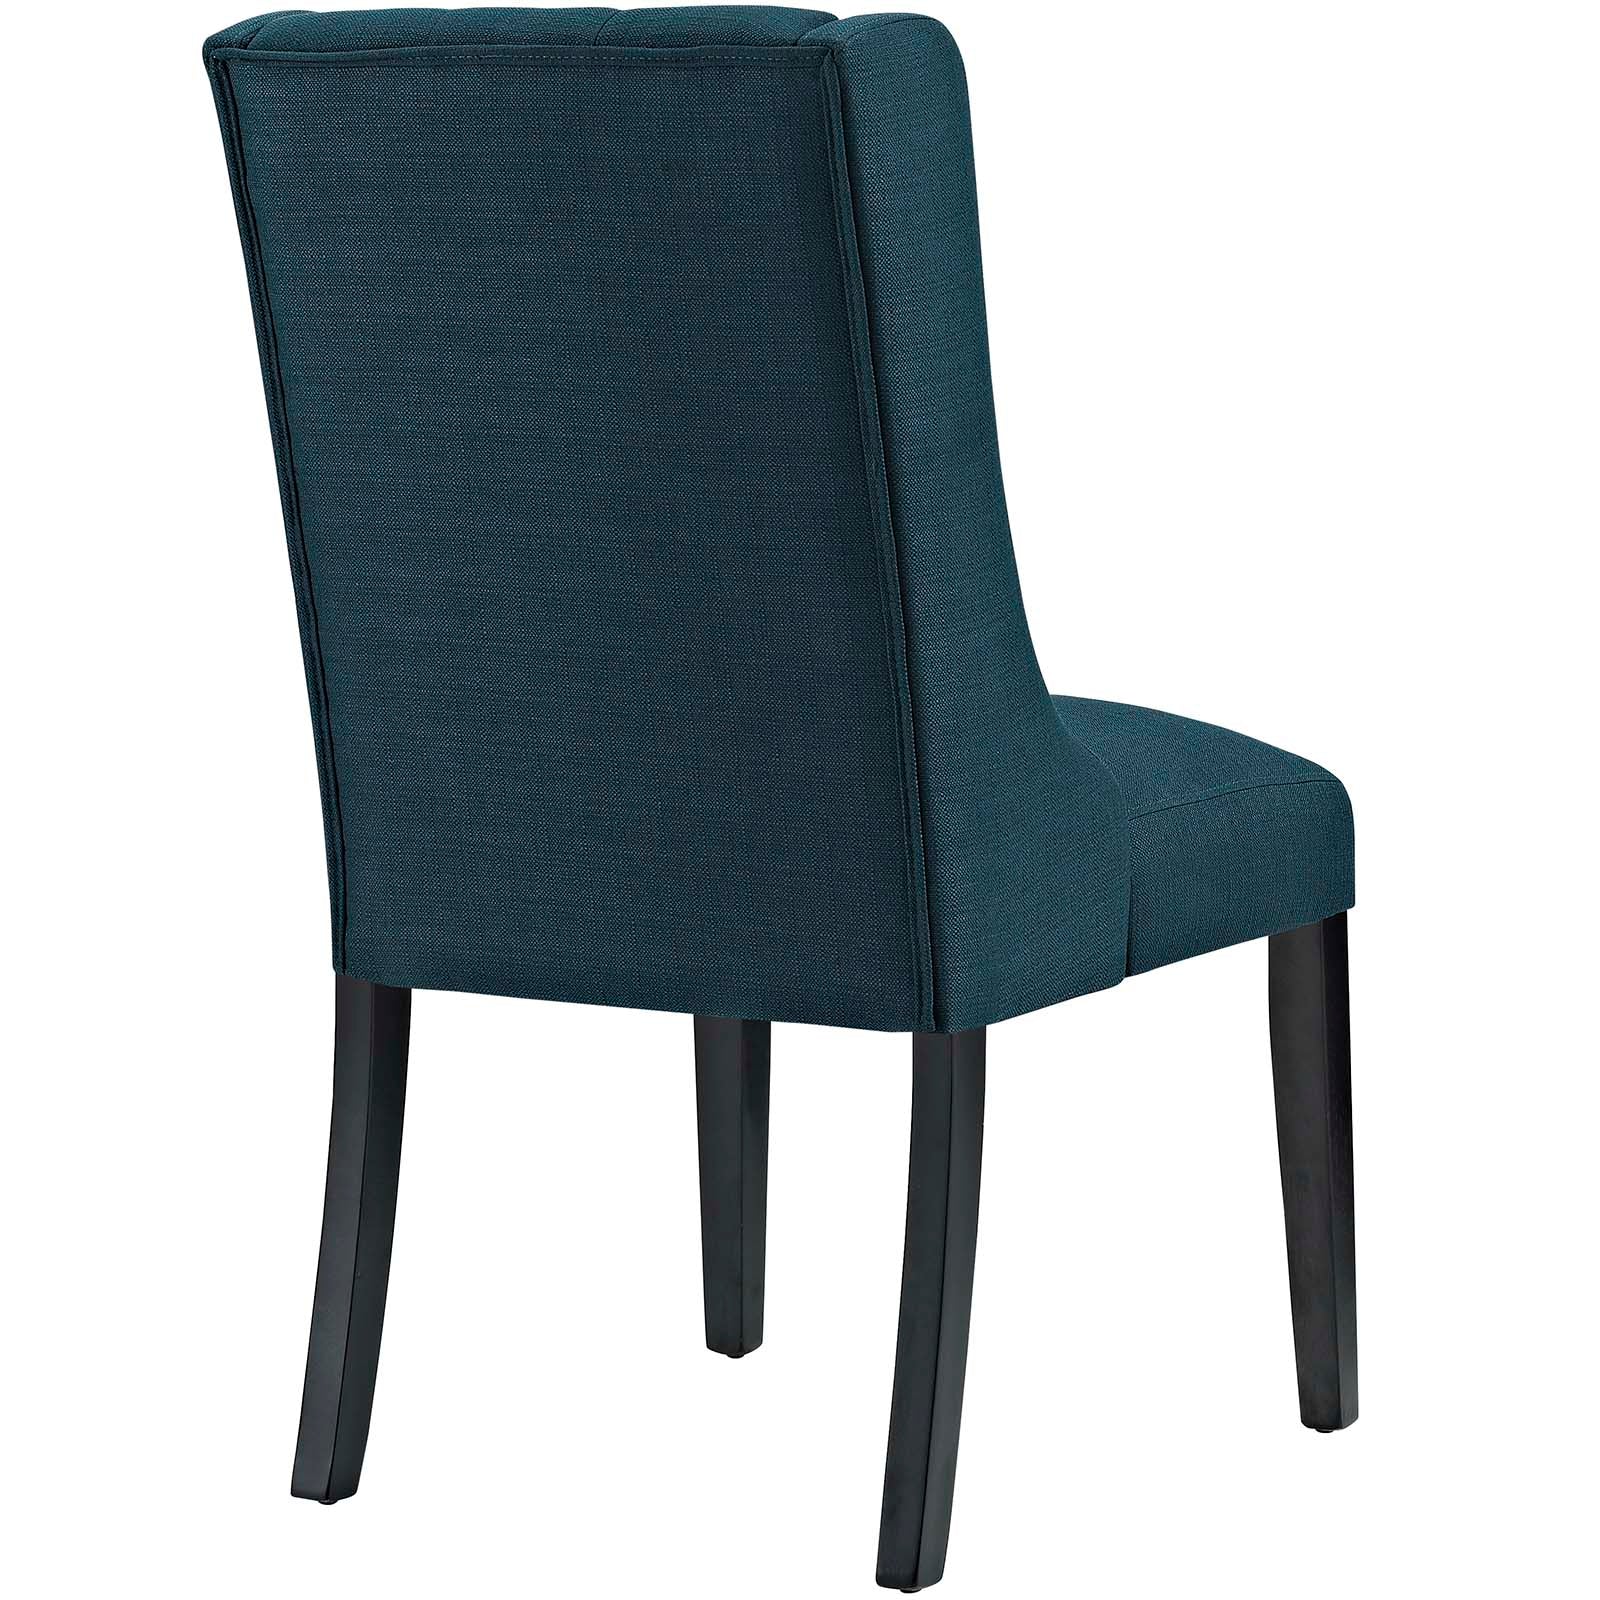 Baronet Dining Chair Fabric Set of 4 - East Shore Modern Home Furnishings